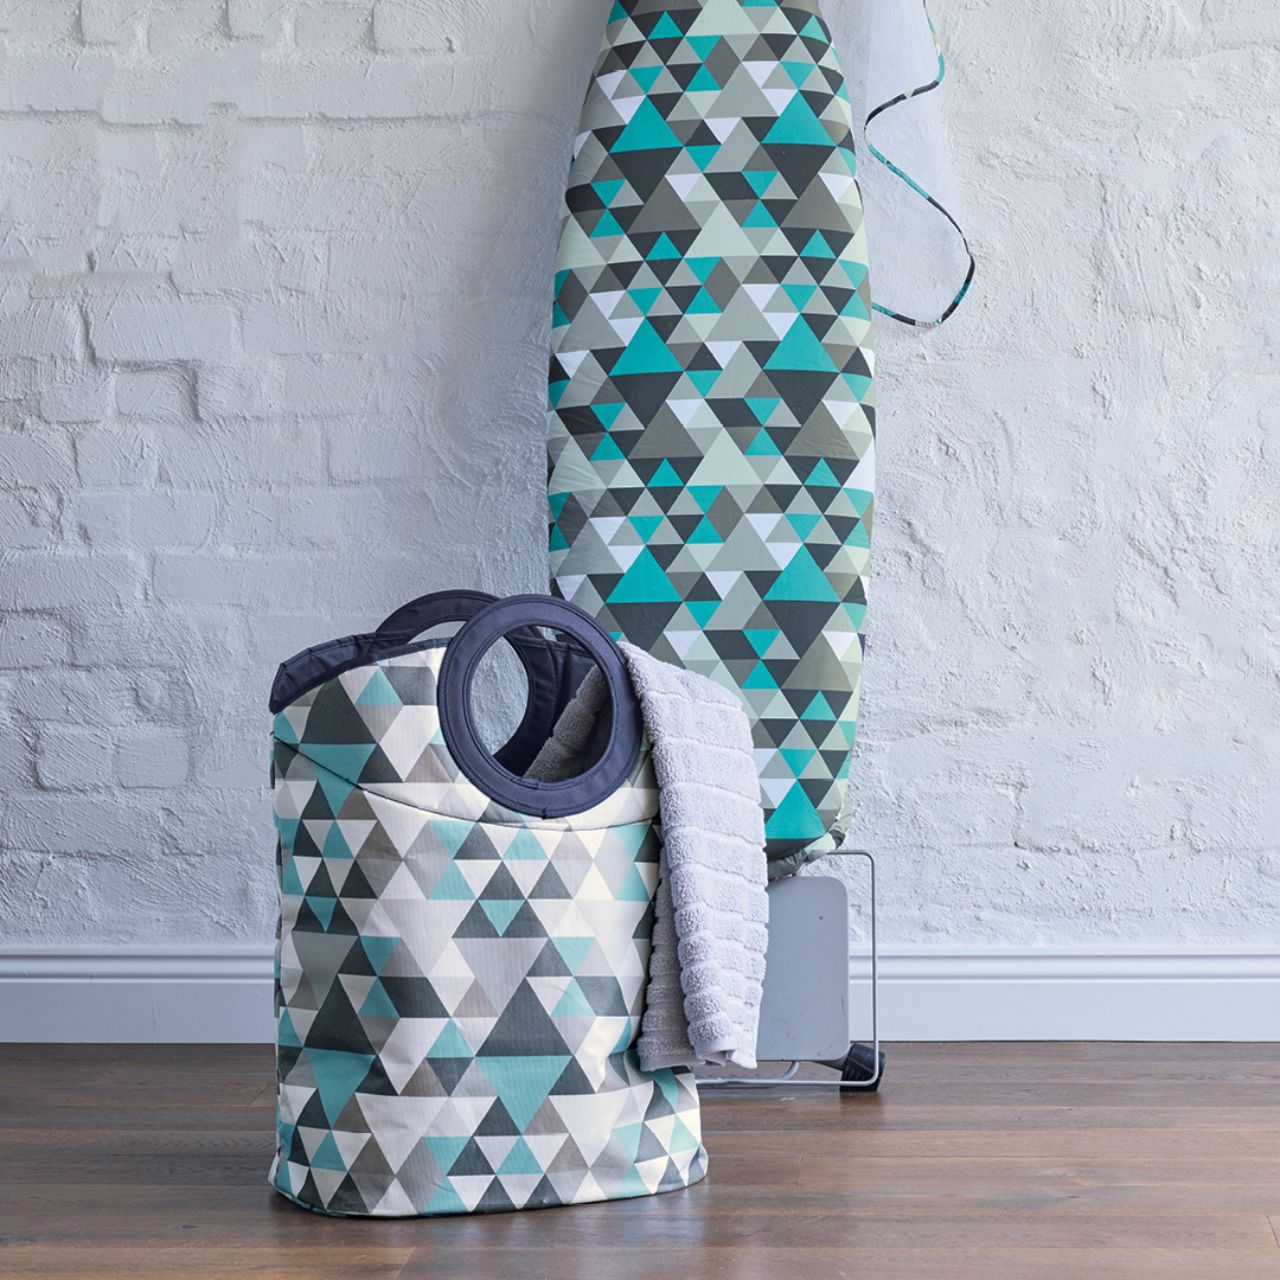 Geo Laundry Bag and Ironing Board cover group shot